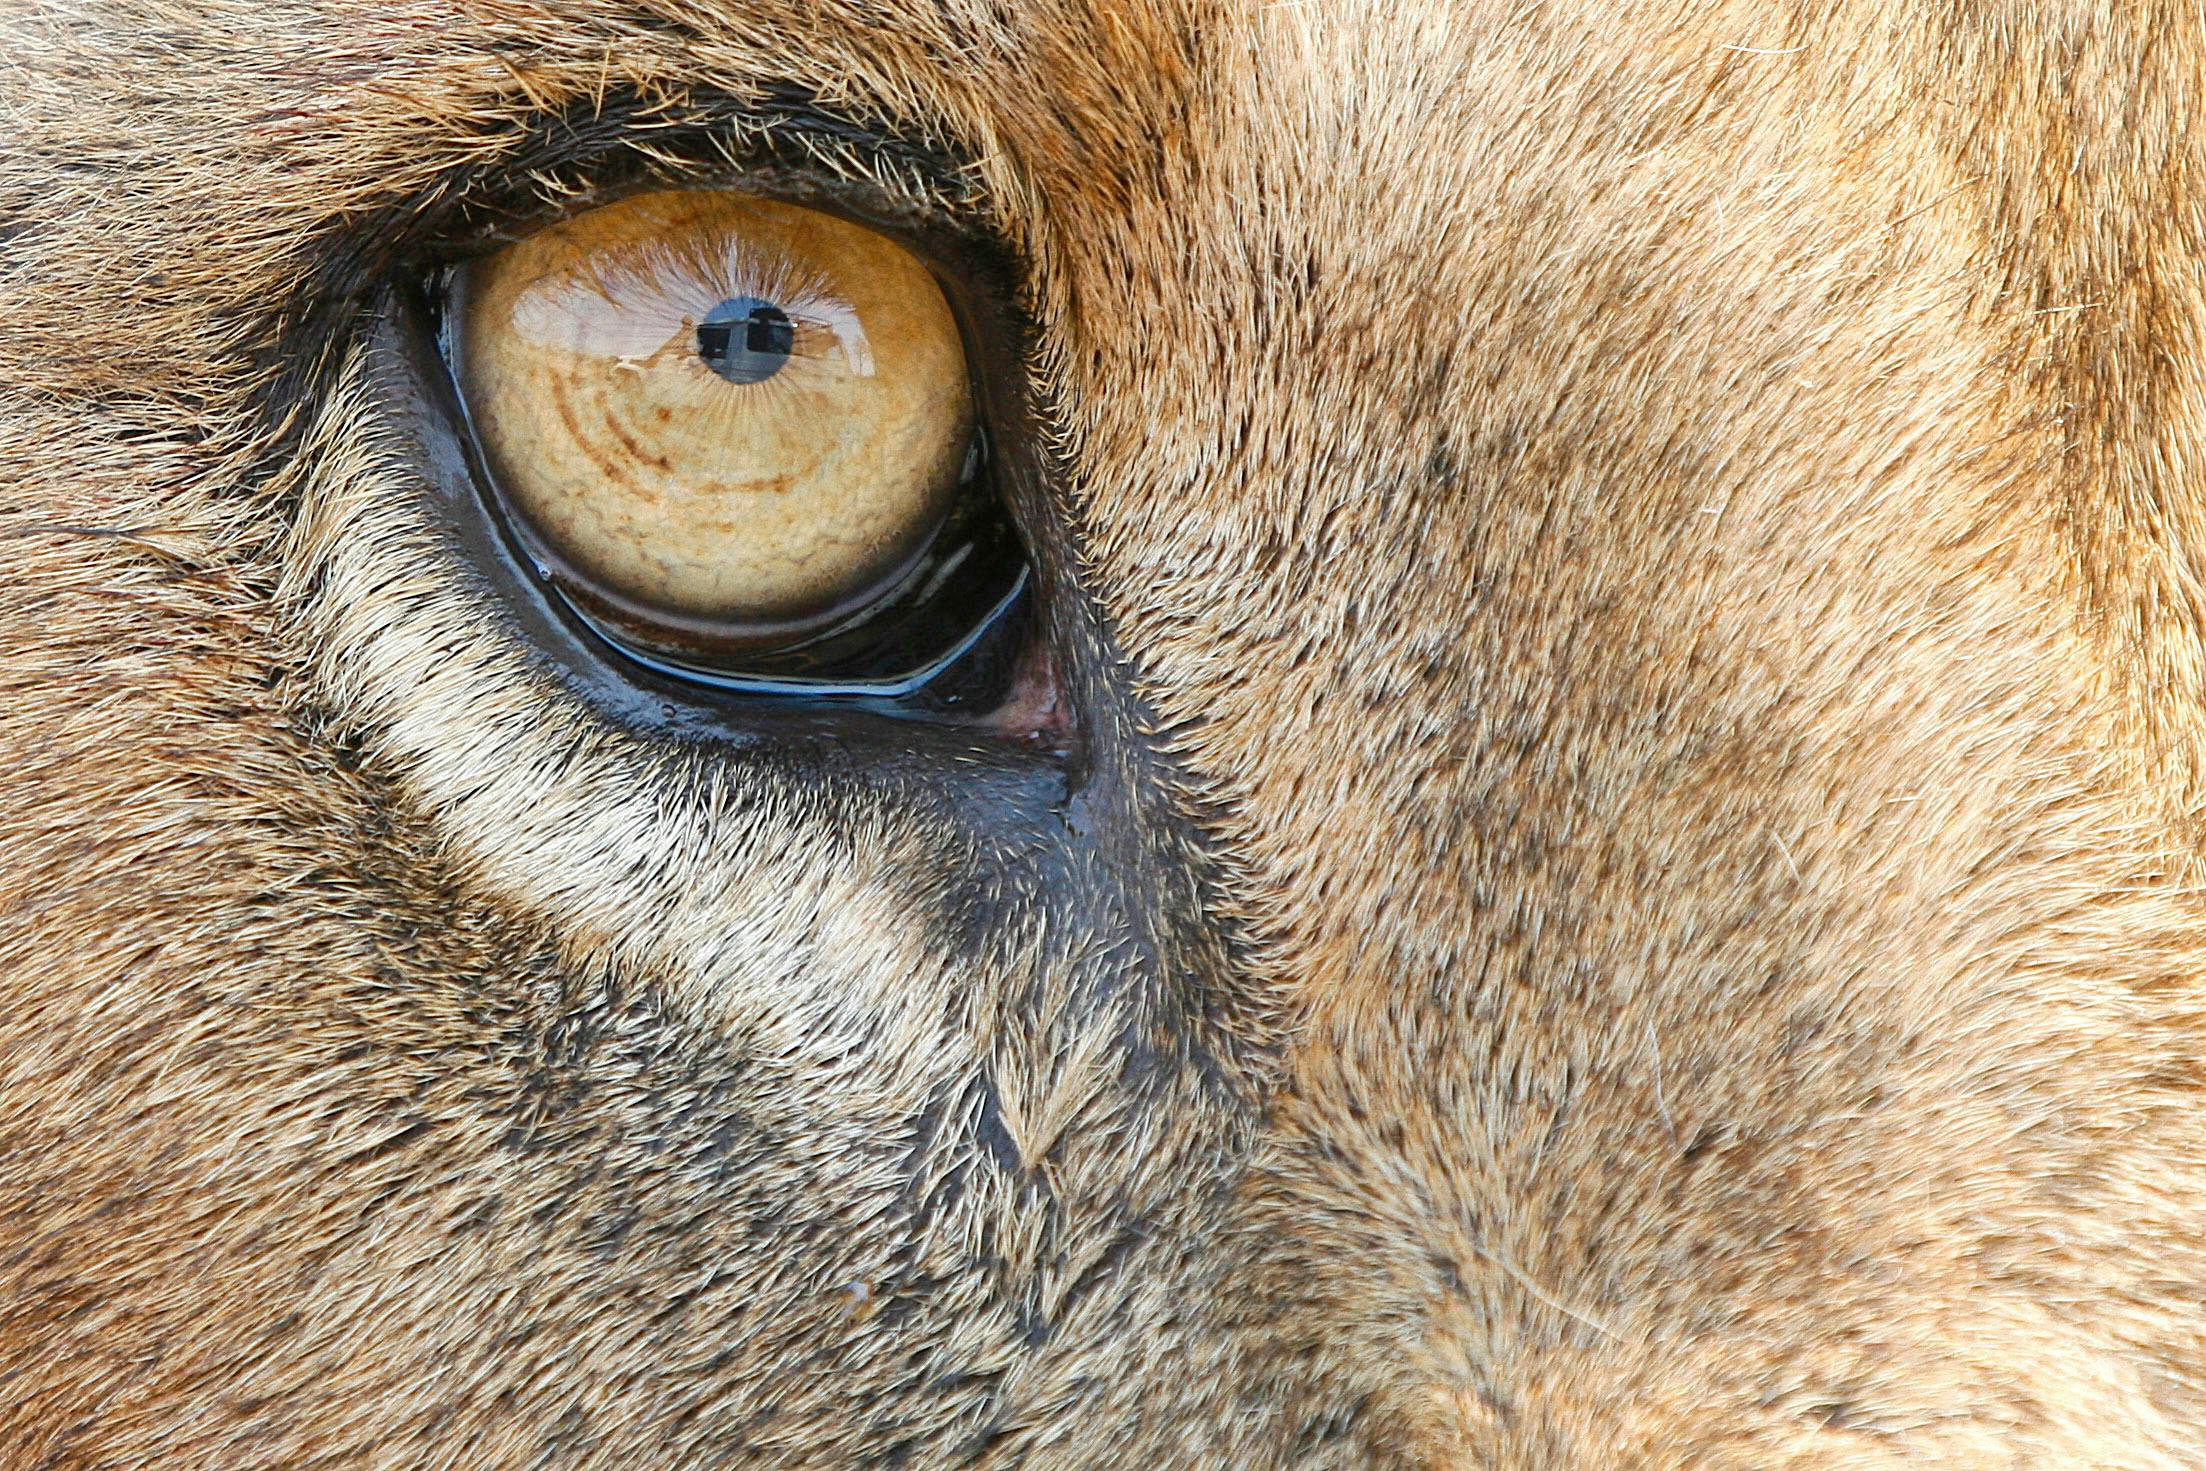 South Africa Bans Commercialized Captive Lion Facilities